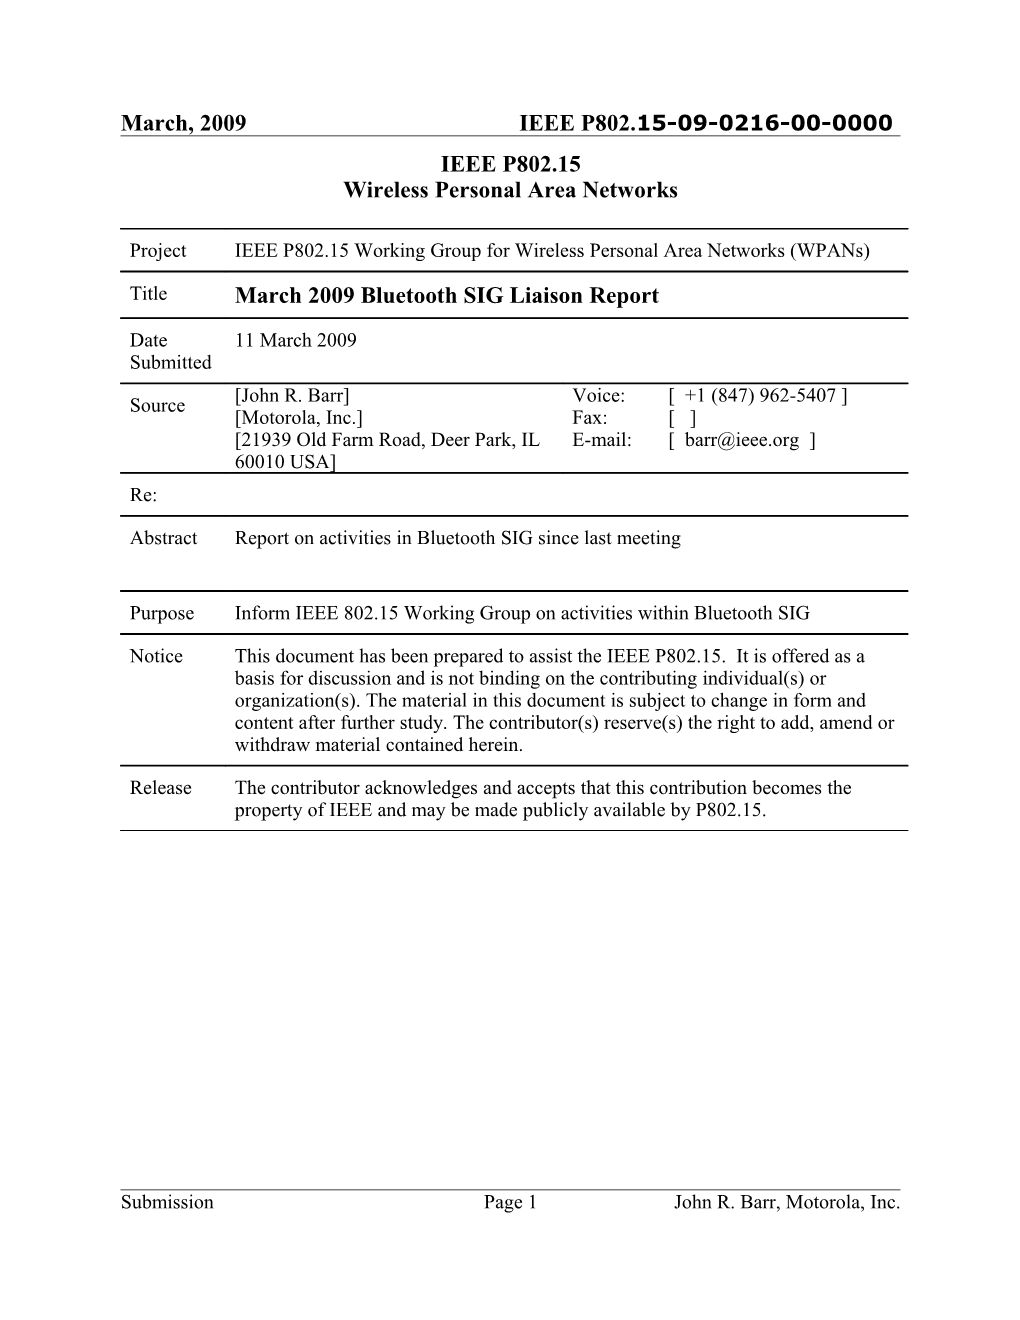 March 2009 Bluetooth SIG Liaison Report